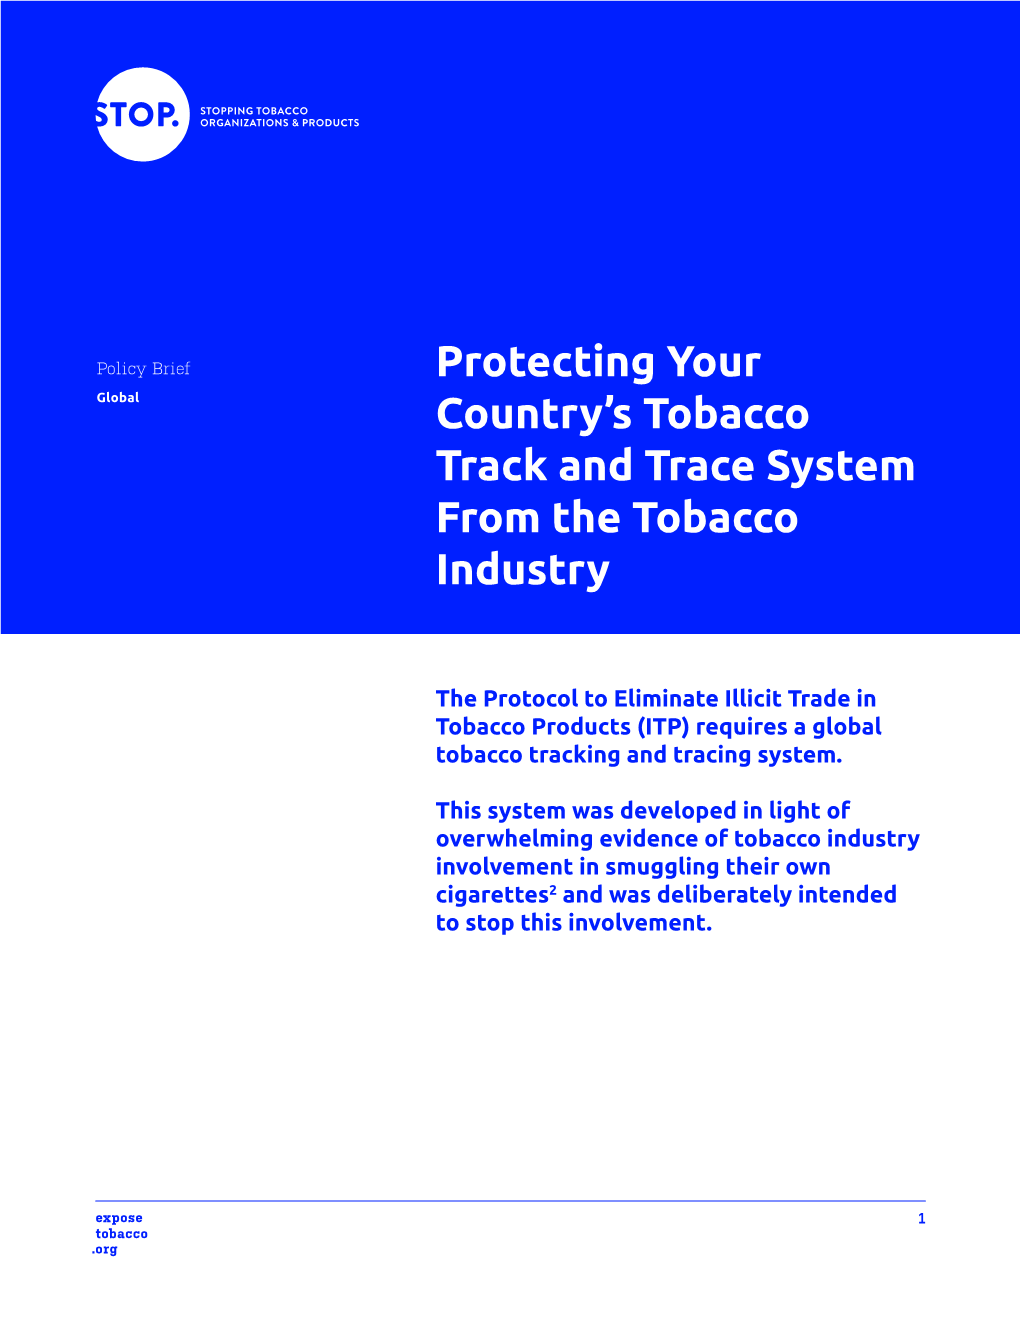 STOP Briefing on Tracking and Tracing